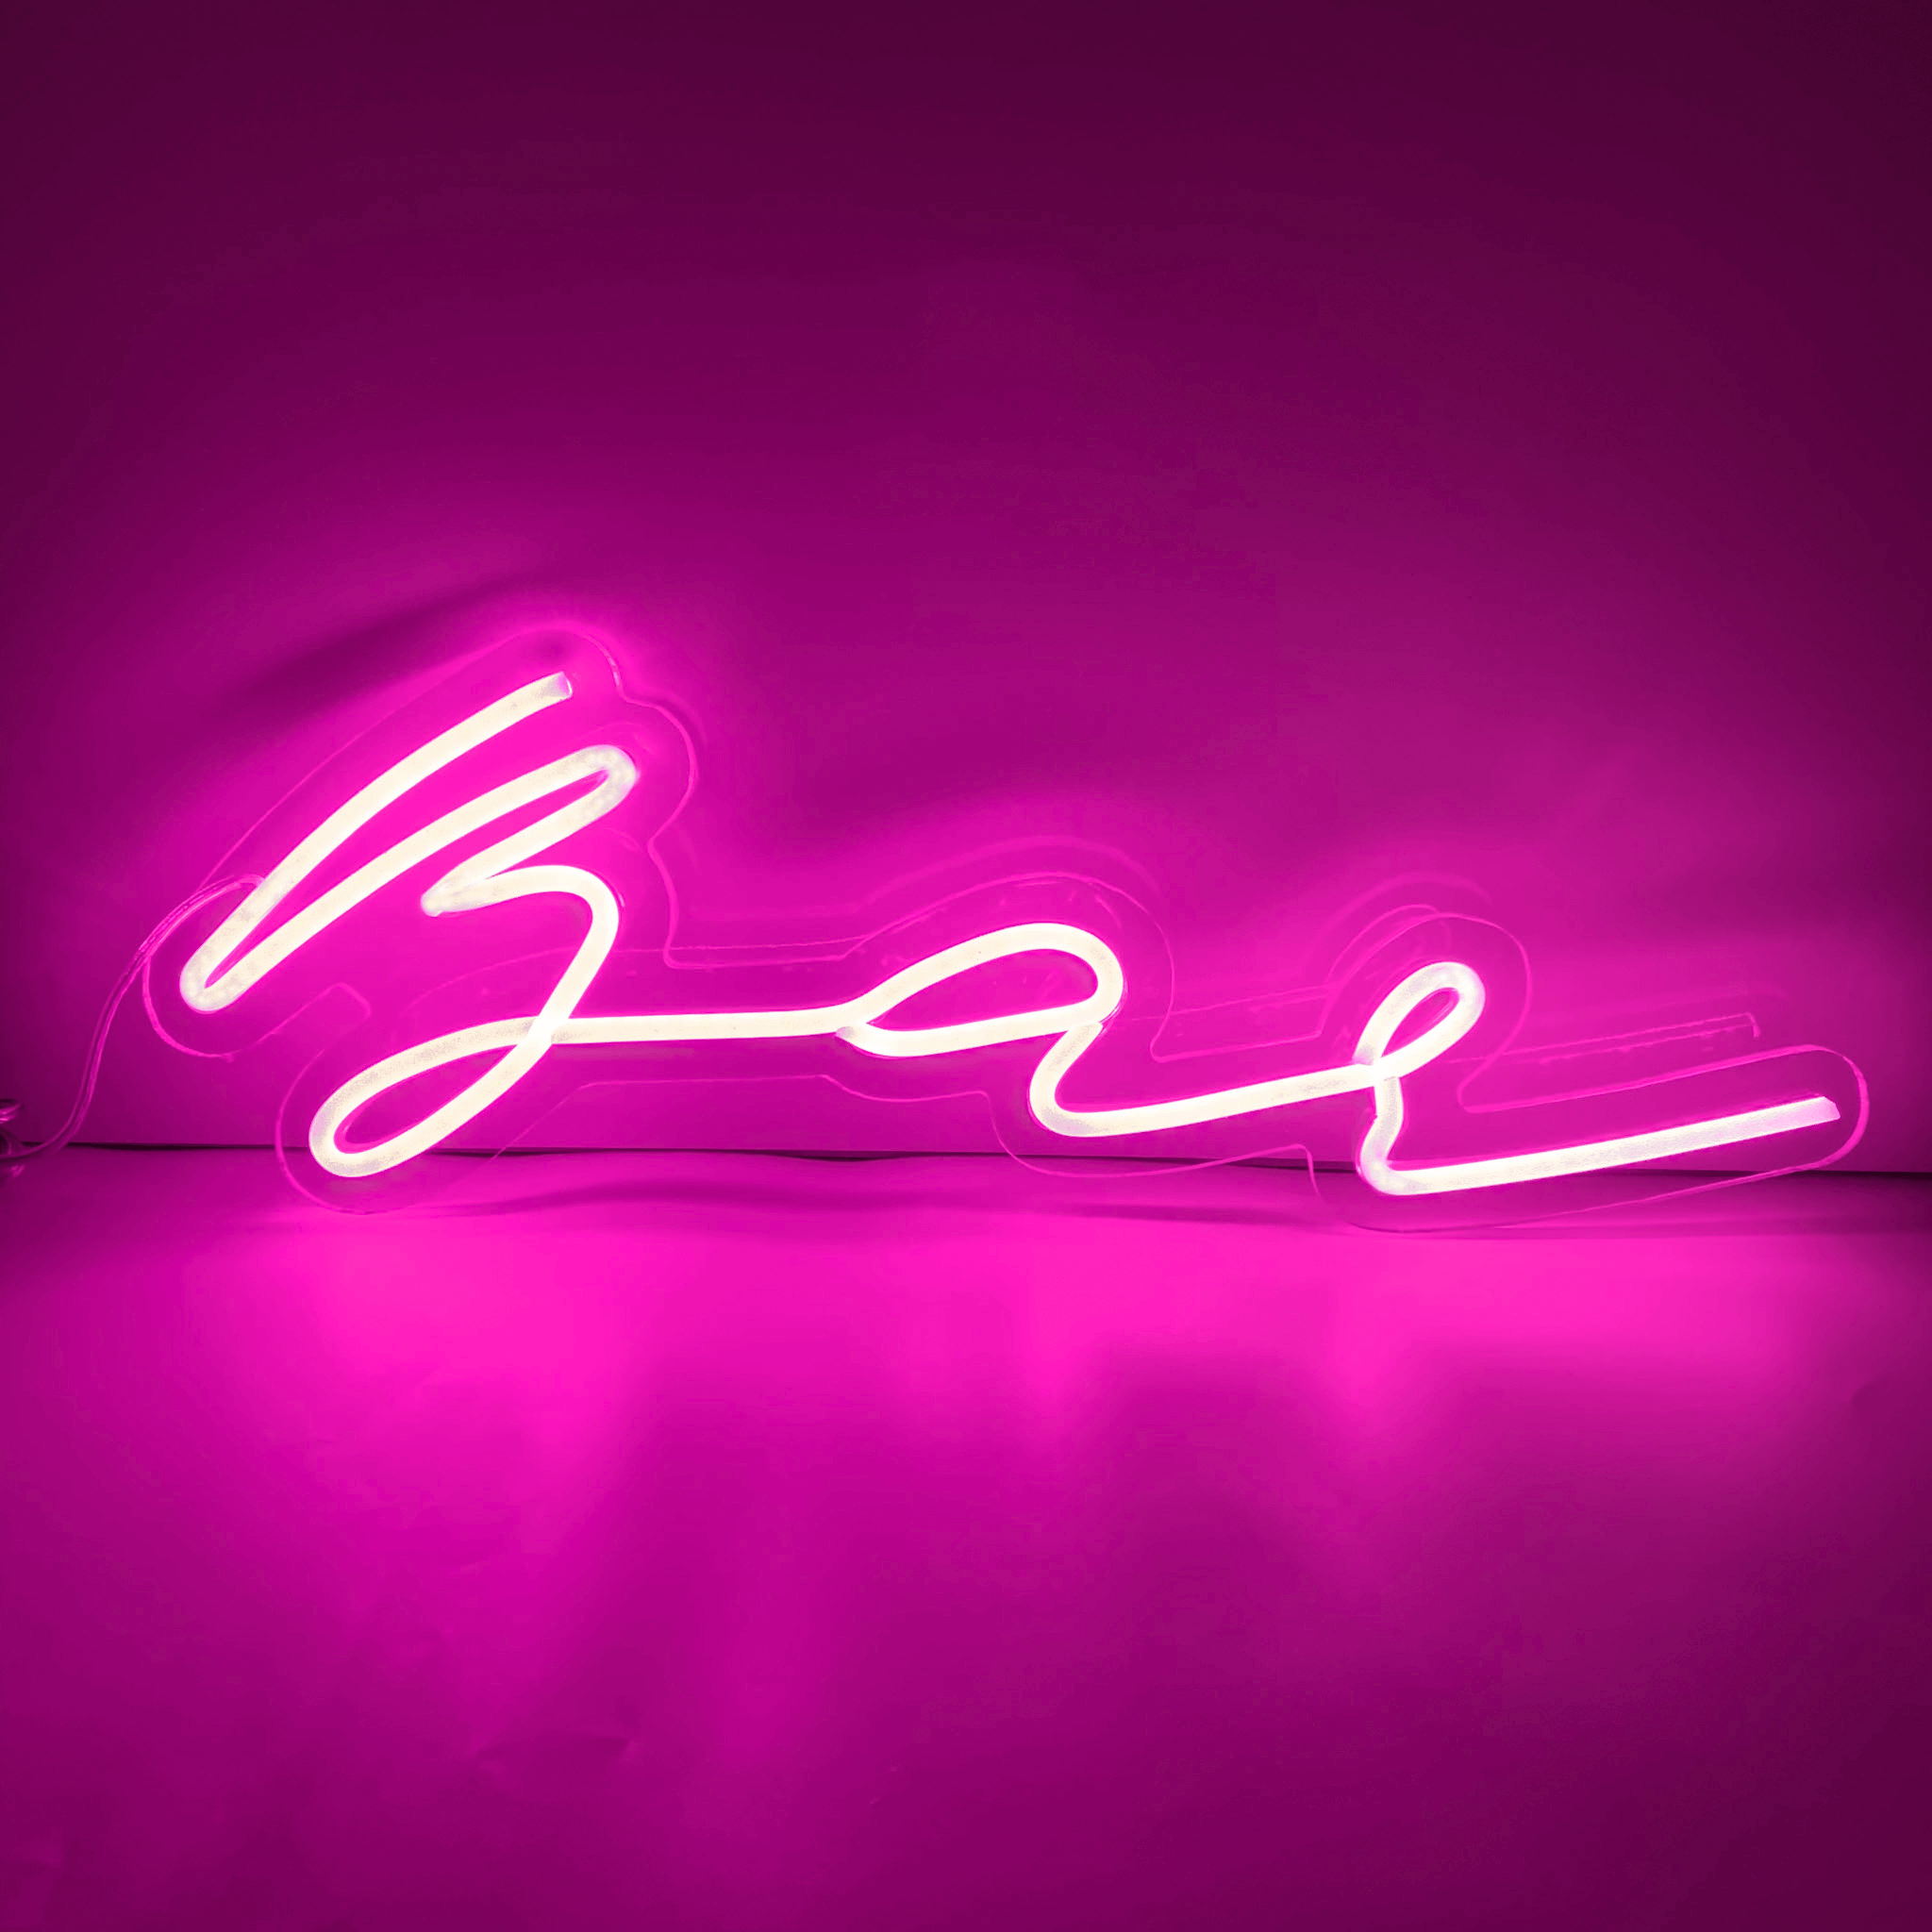 100 LED NEON SIGN